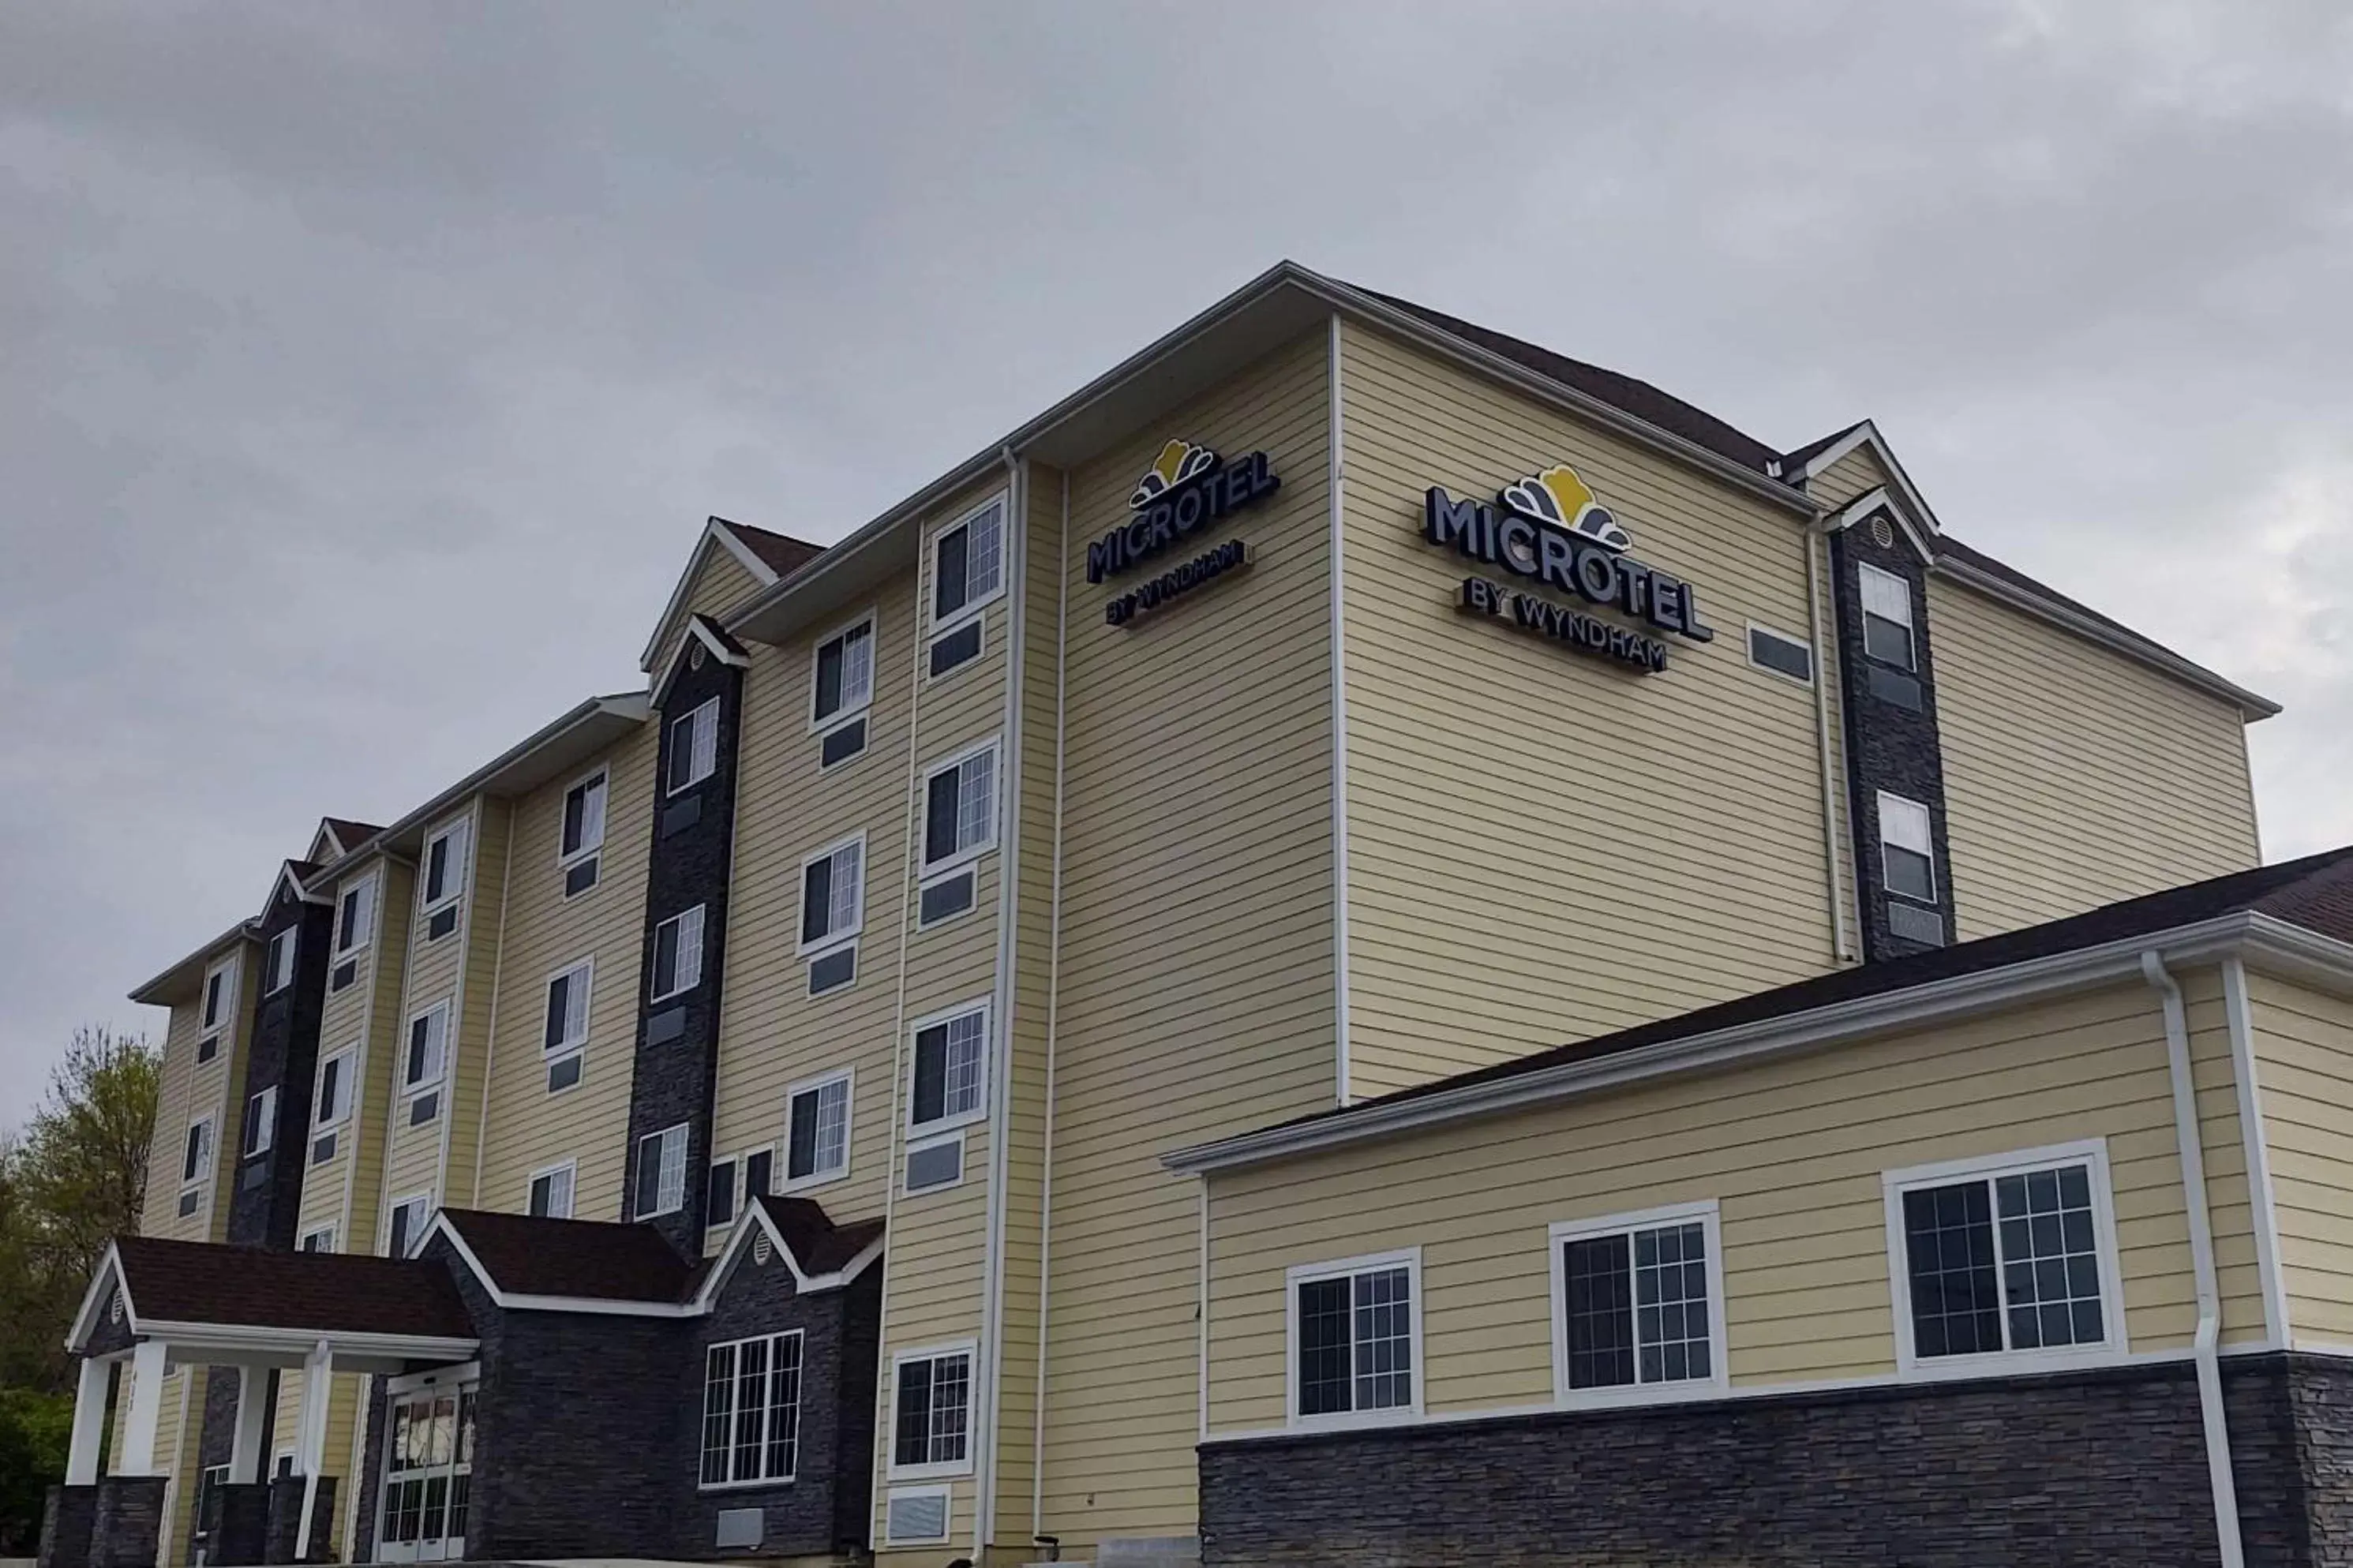 Property building in Microtel Inn & Suites by Wyndham Liberty NE Kansas City Area